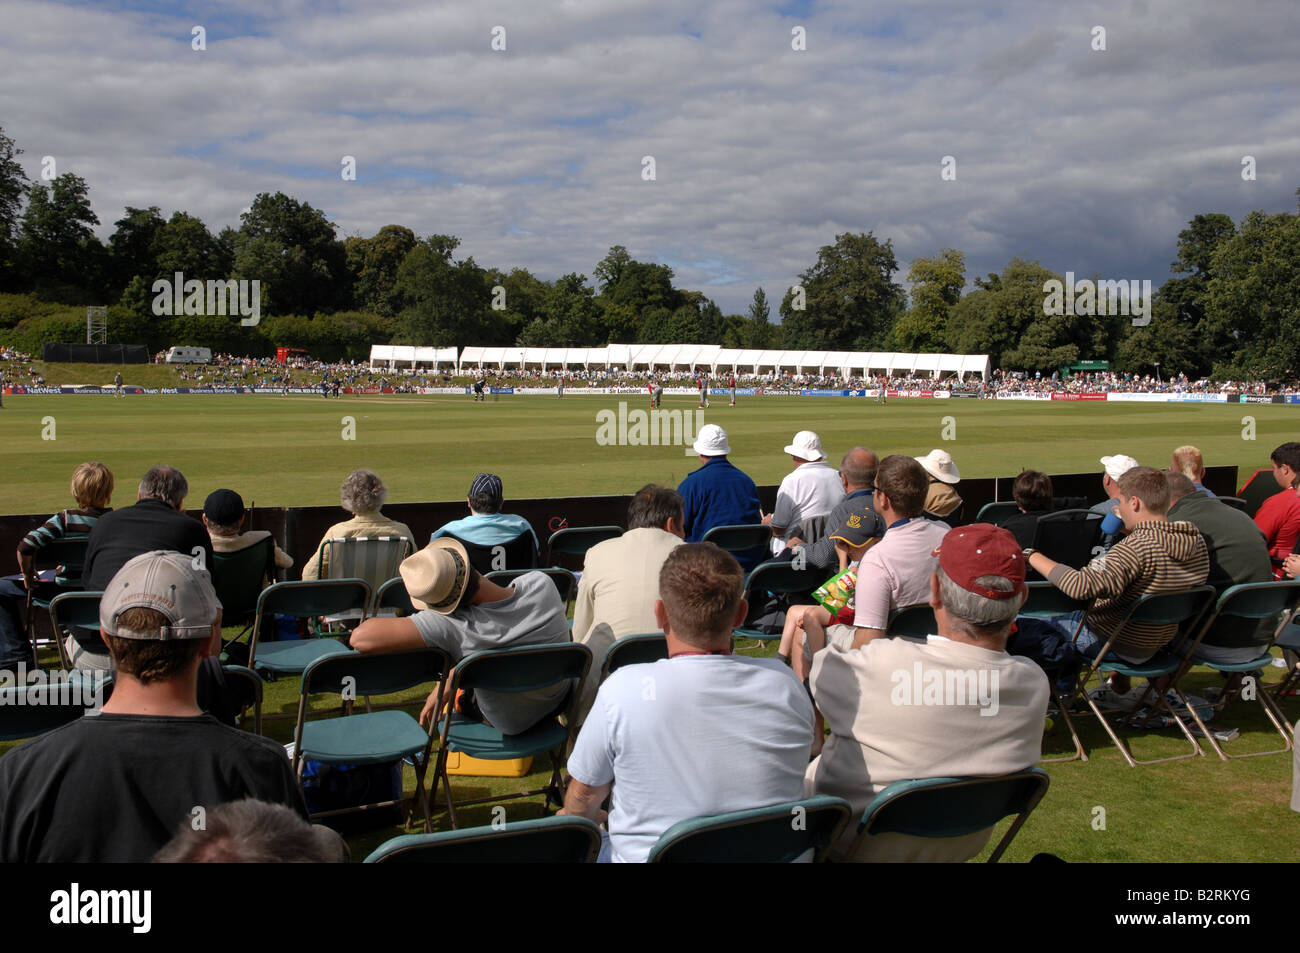 Spectators watch a cricket match between Sussex and Somerset at the Arundel cricket ground UK Stock Photo